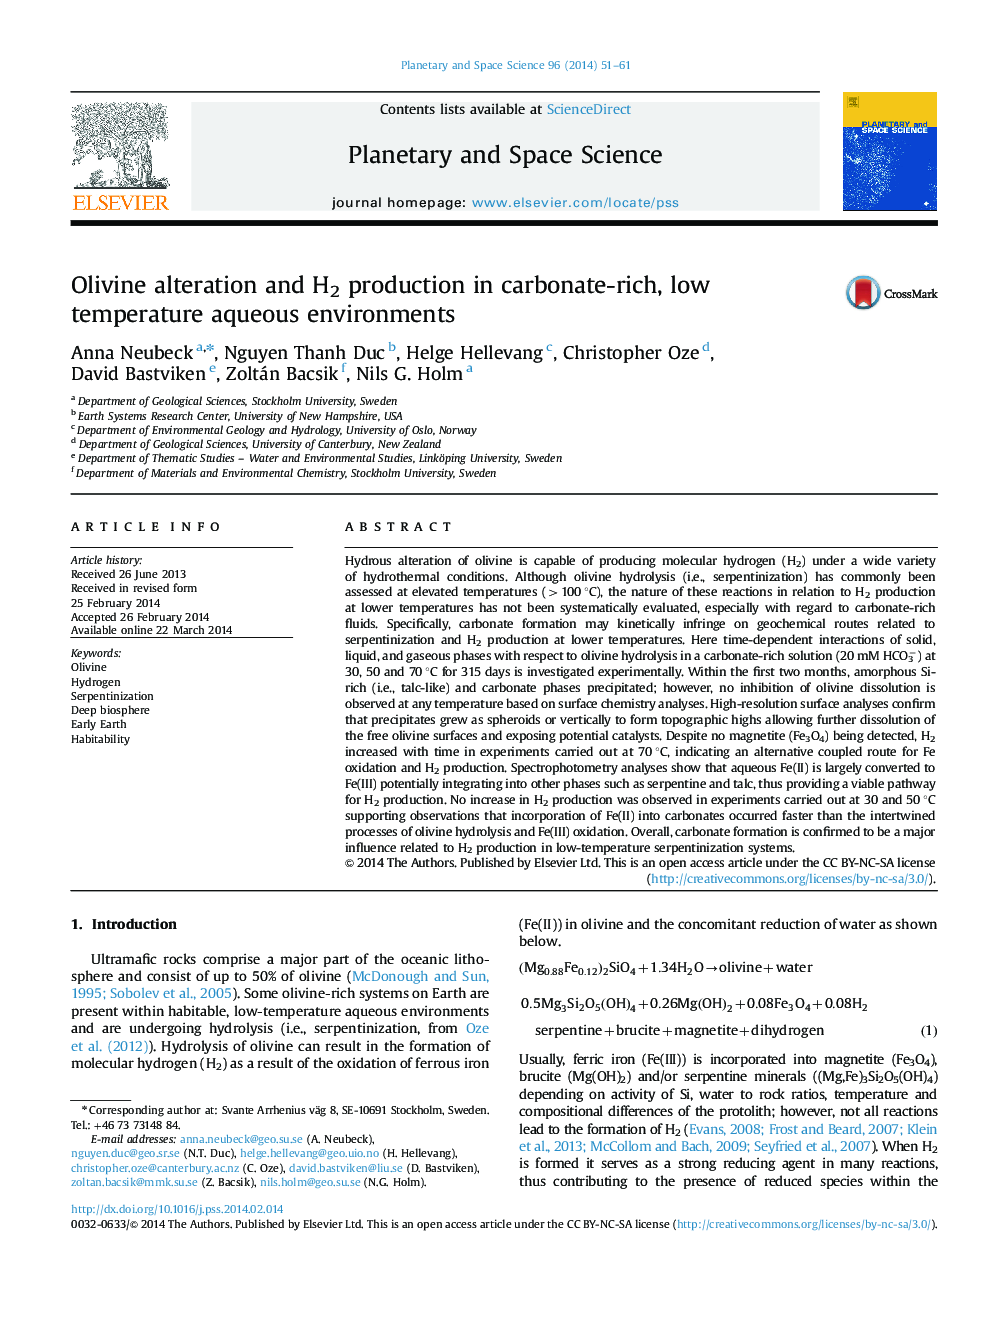 Olivine alteration and H2 production in carbonate-rich, low temperature aqueous environments